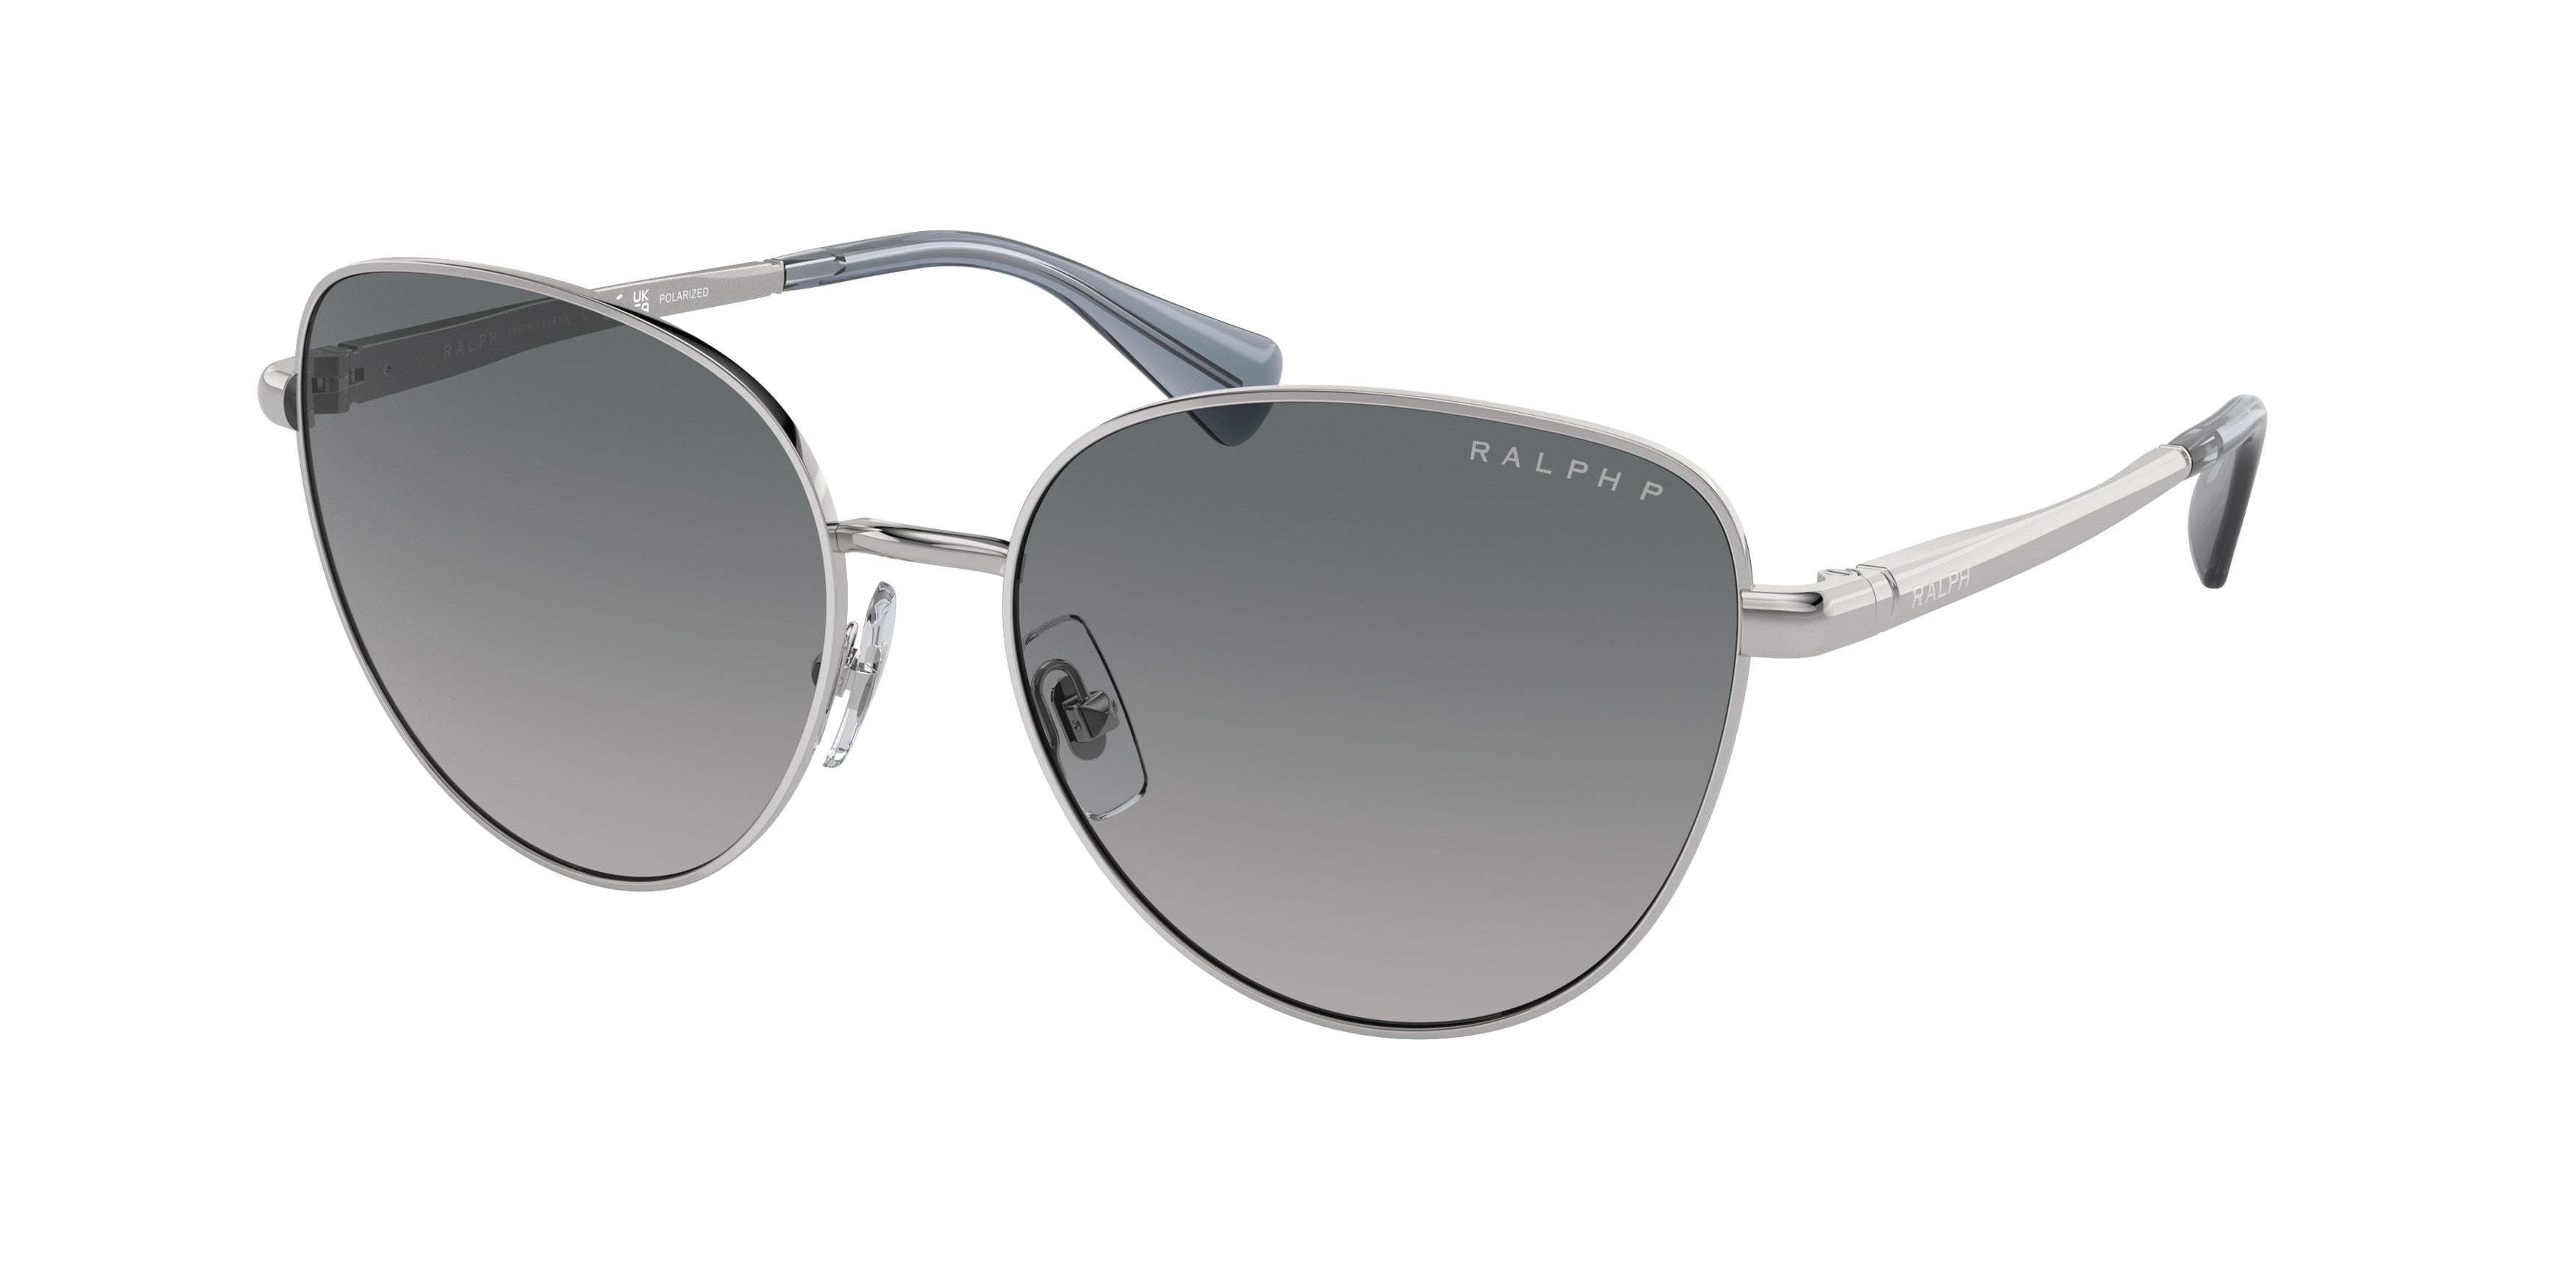 Ralph RA4144 Butterfly Sunglasses  90018S-Shiny Silver 58-145-16 - Color Map Silver